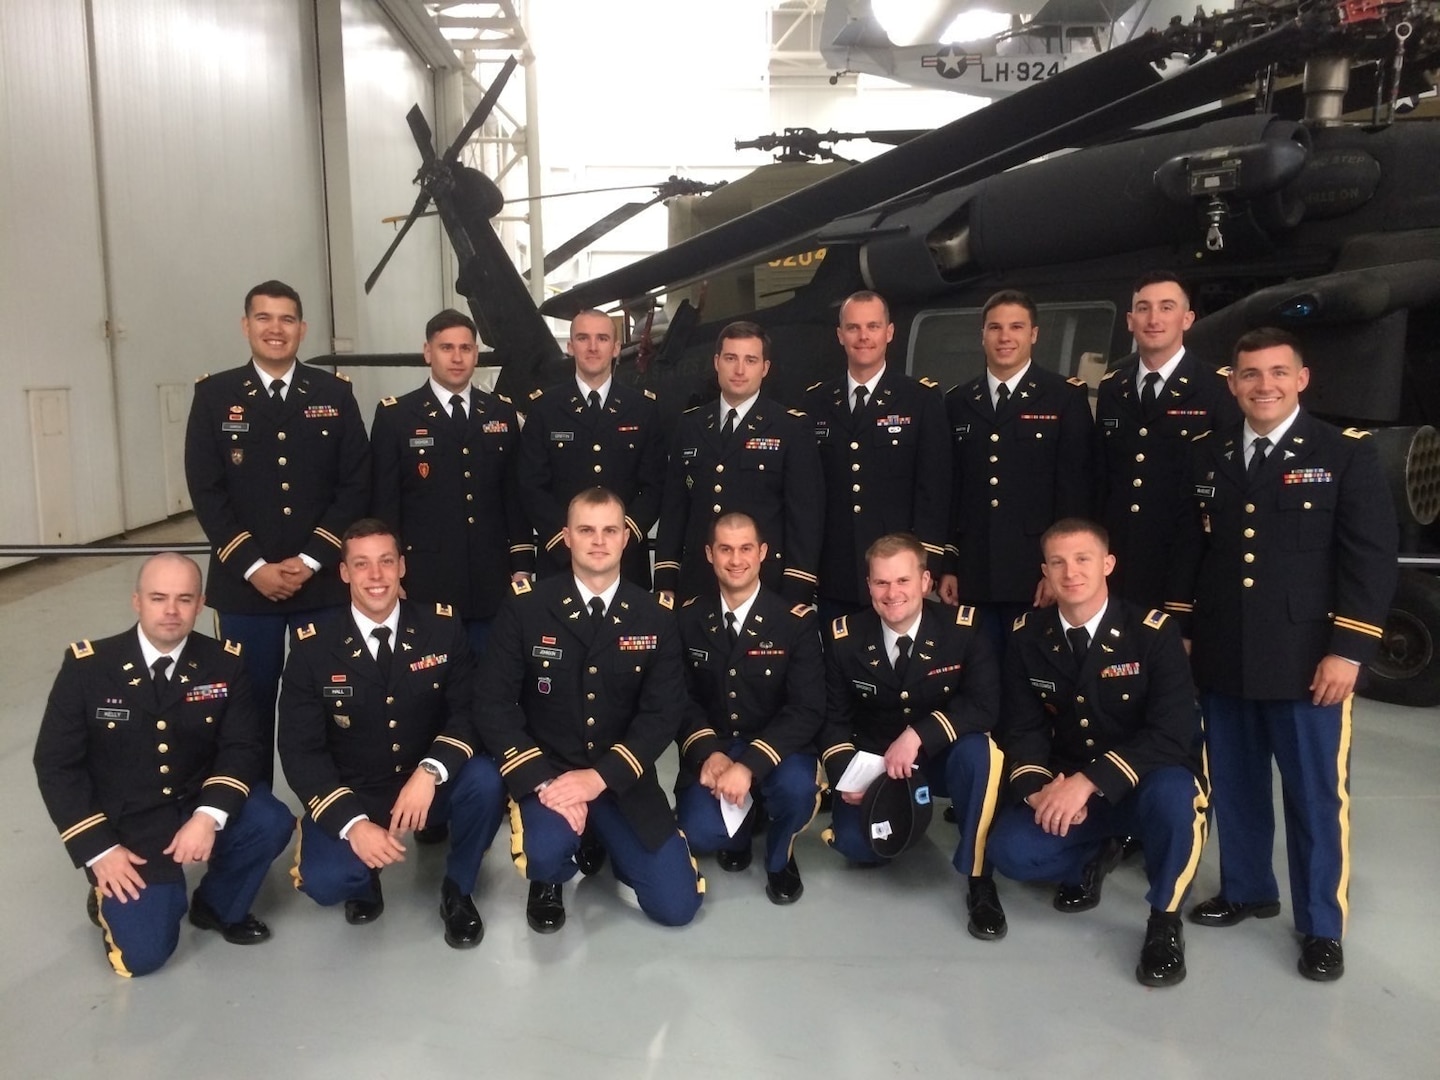 U.S. Army Chief Warrant Officer Mauricio Garcia, a freshly minted UH-60M Black Hawk pilot, poses with his classmates after graduation from the UH-60M qualification course at Fort Rucker, Alabama. (Courtesy photo)